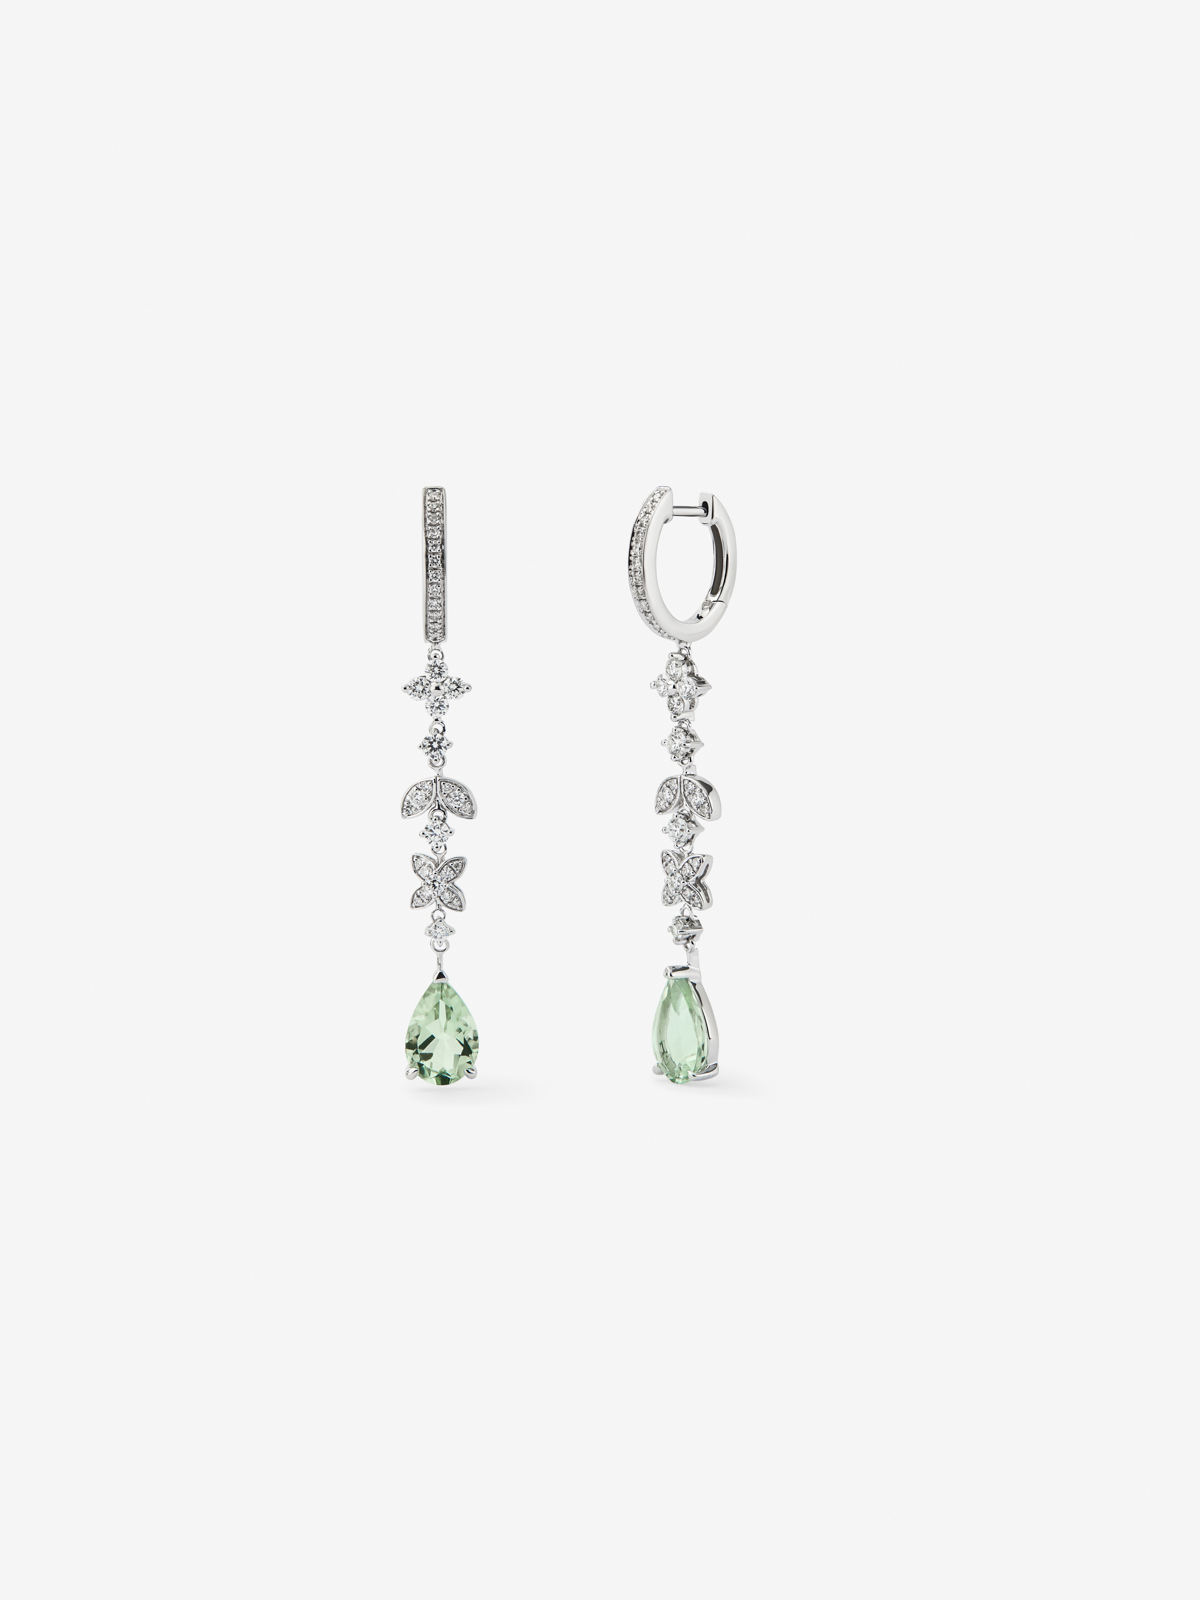 18K white gold earrings with 0.78 ct brilliant-cut diamonds and pear-cut green amethysts